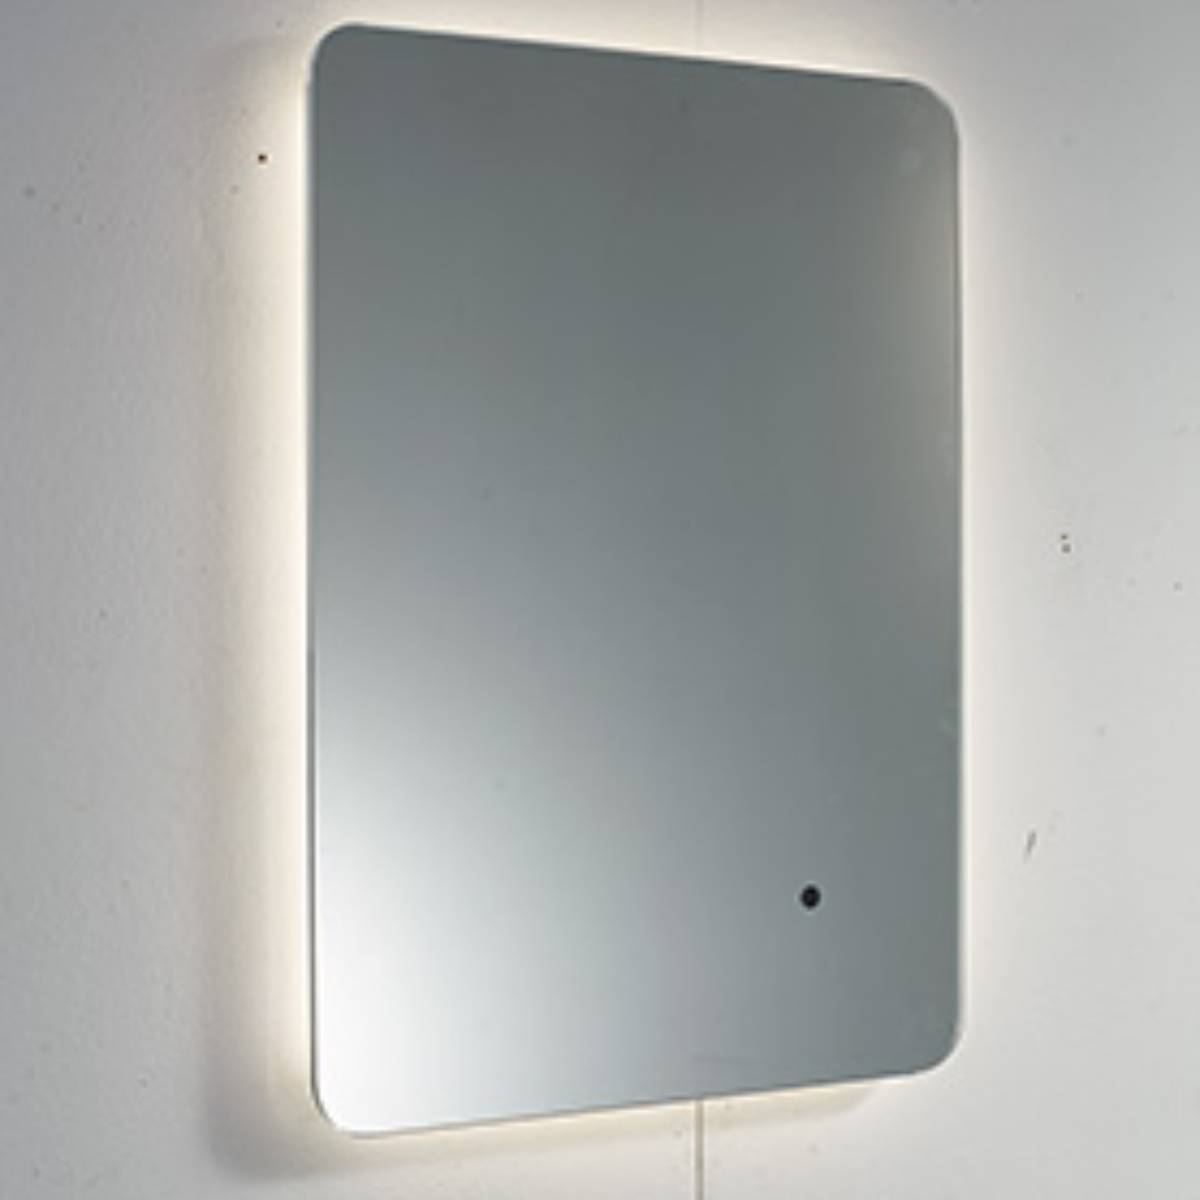 Clear Look Calcot 800 x 600mm LED Mirror (12086)